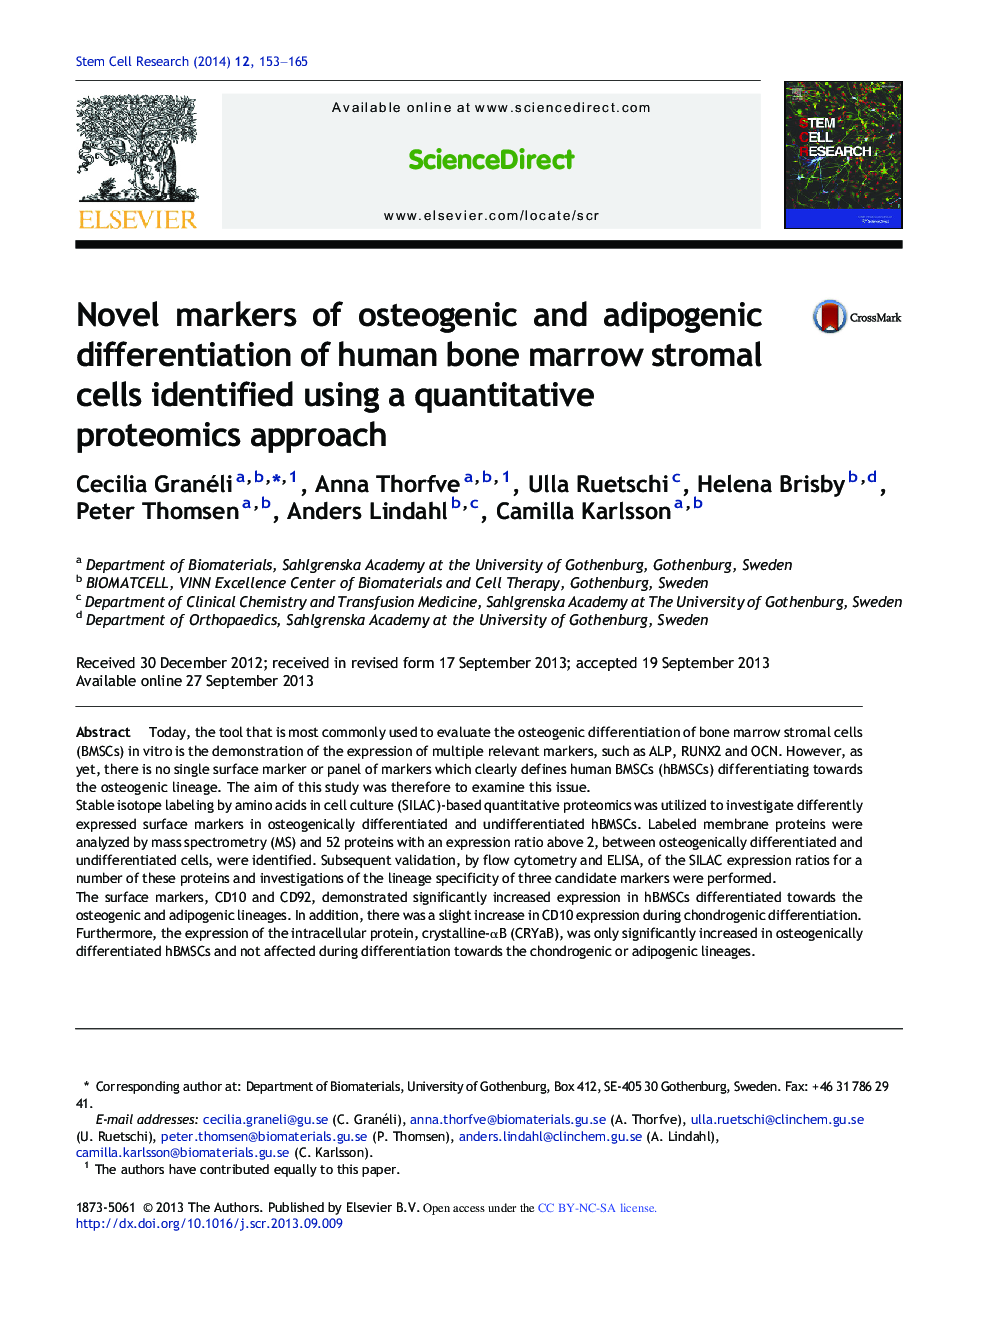 Novel markers of osteogenic and adipogenic differentiation of human bone marrow stromal cells identified using a quantitative proteomics approach